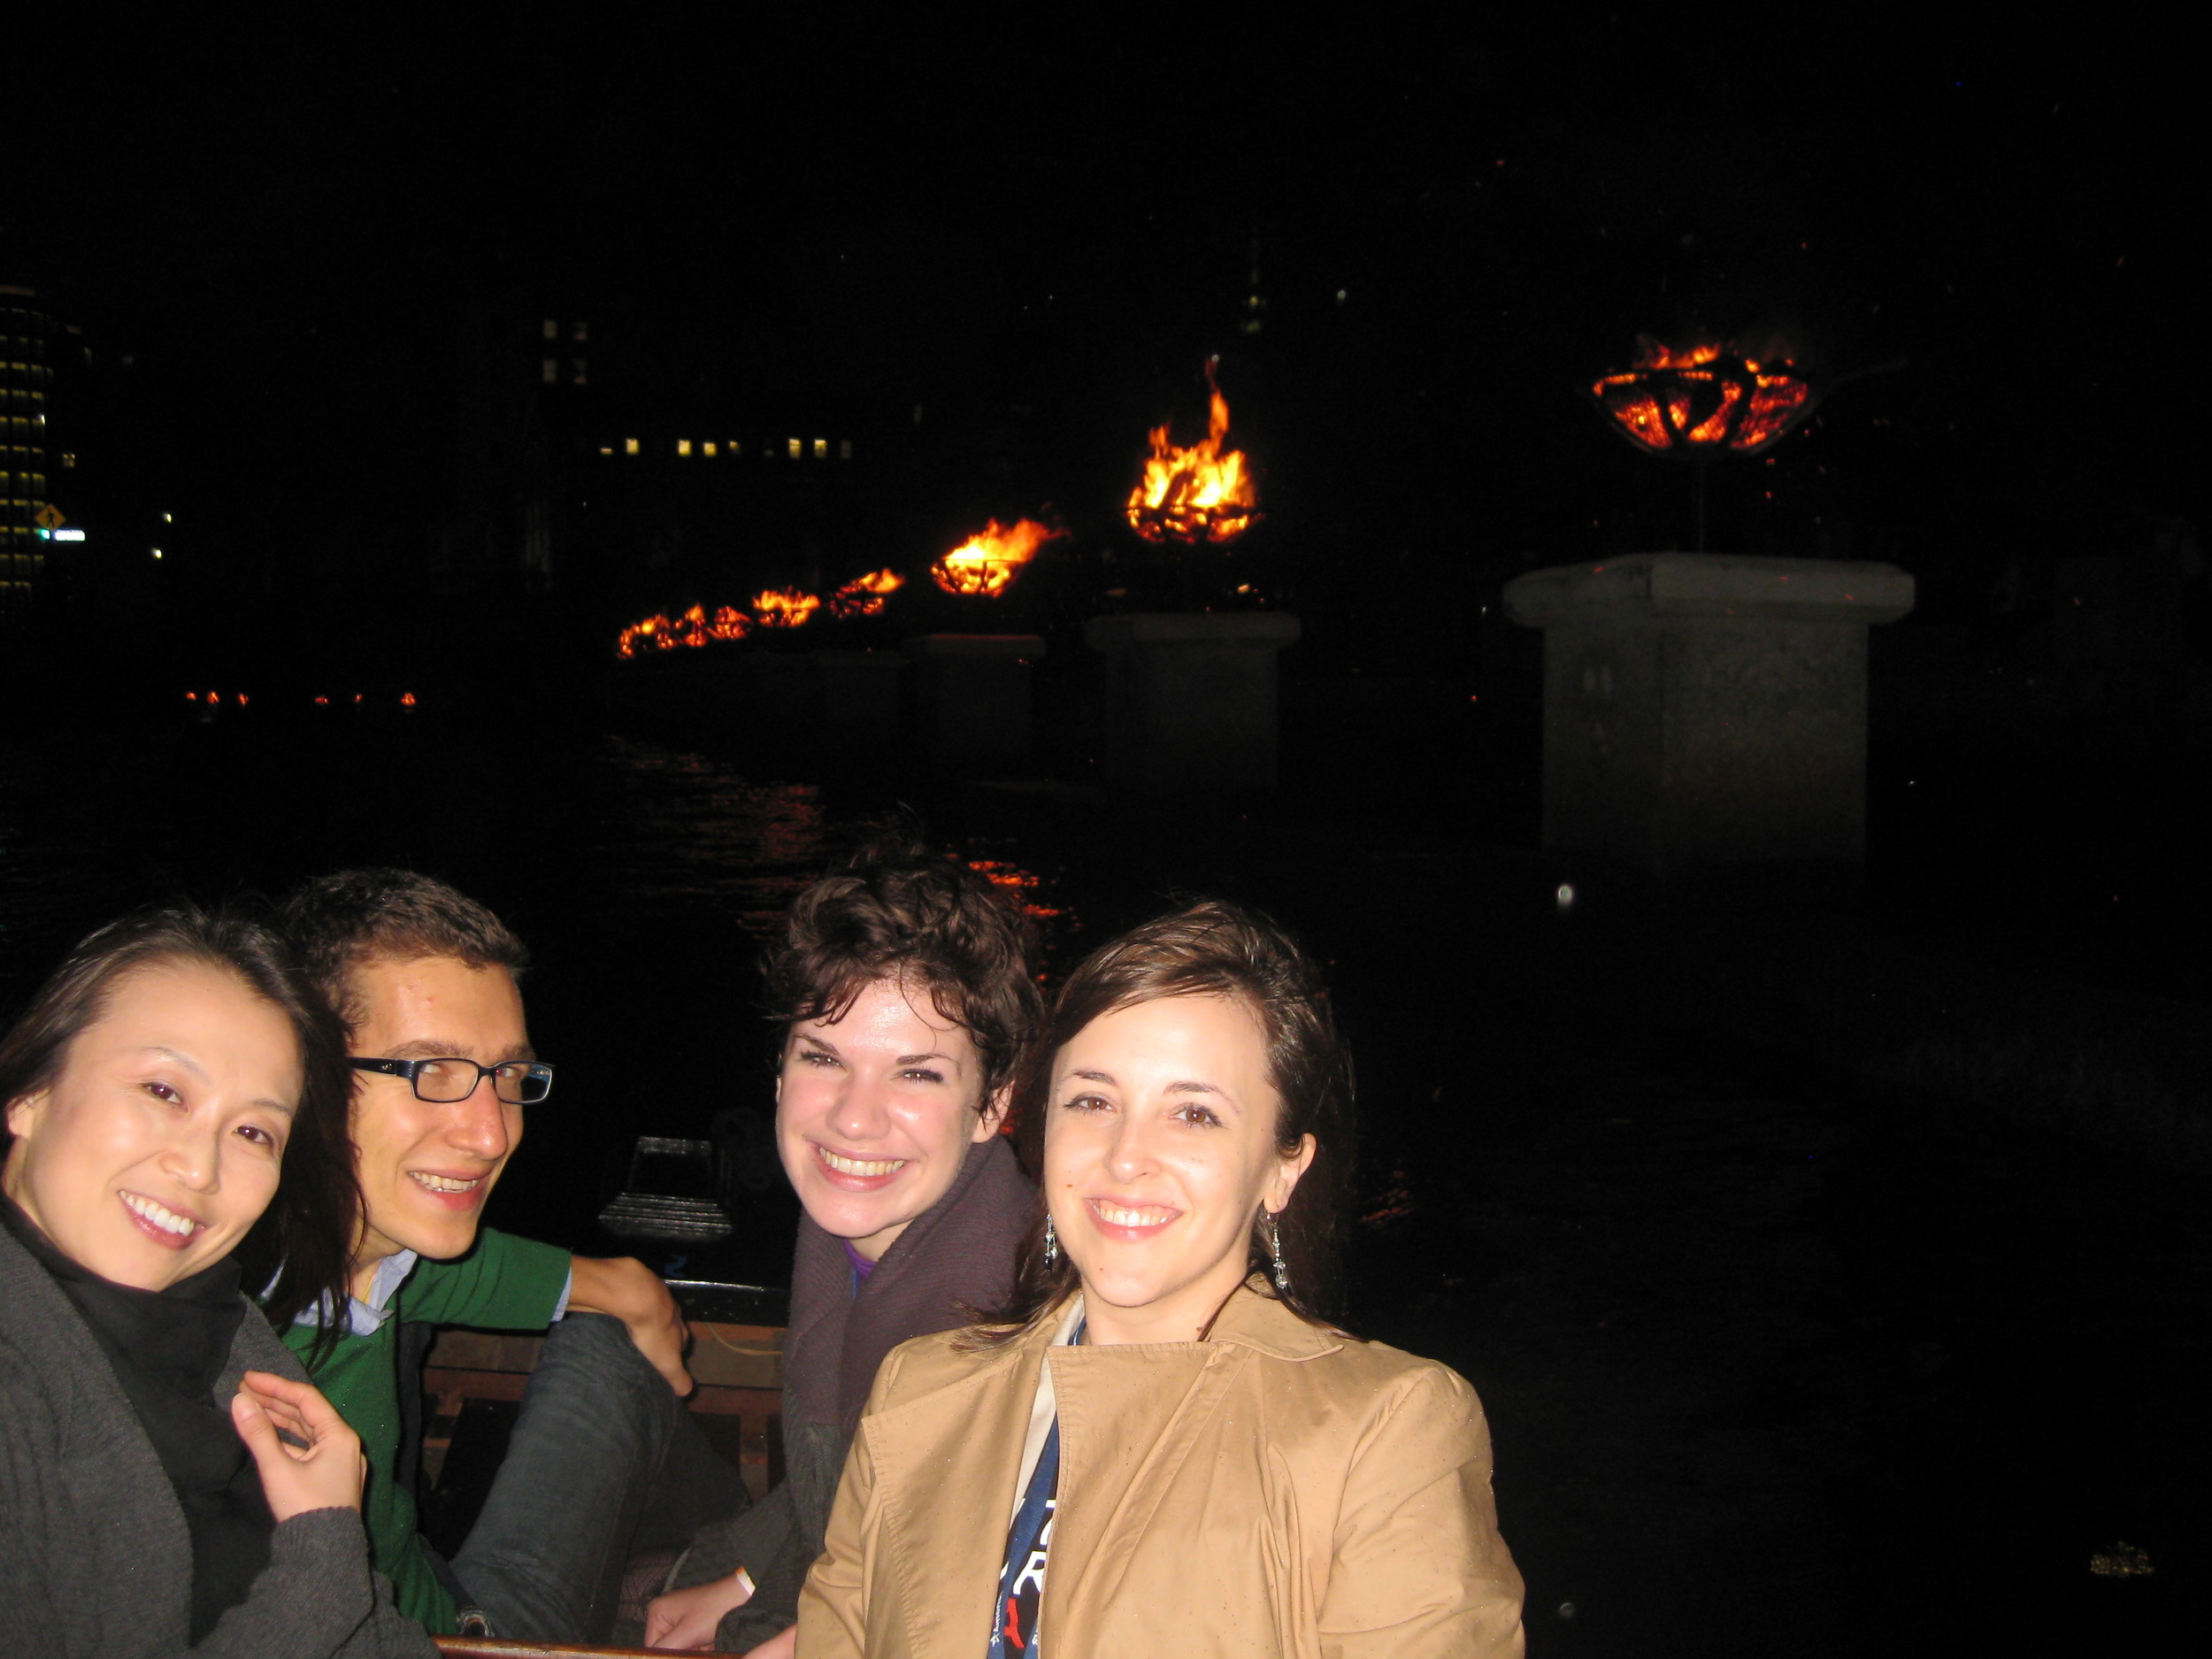 Pittsburgh contingent (L-R Haebin of CAMT, MAMs Justin and Corwin, and the Cultural Trust's Lauren) experience Water Fire